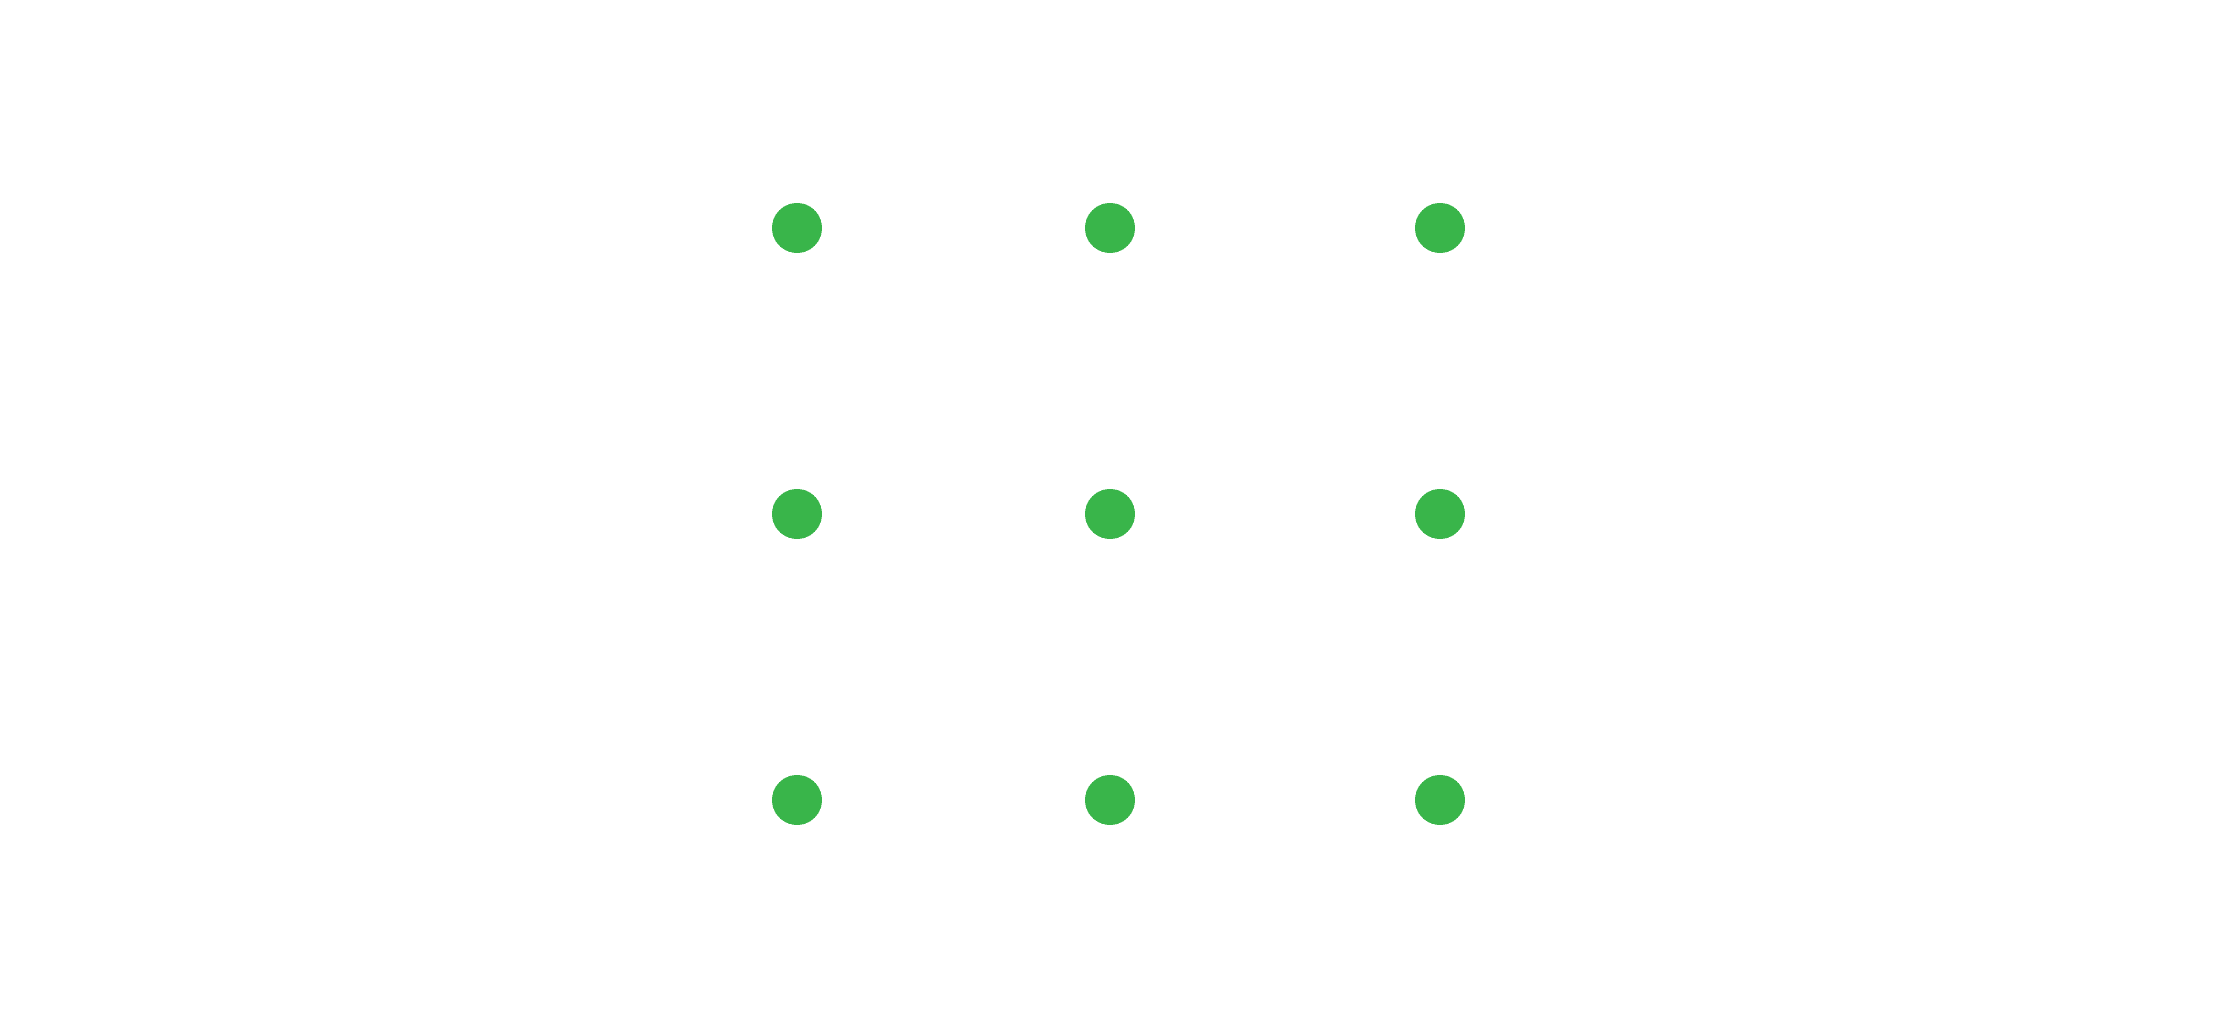  9-dots-4-lines-puzzle creative thinking processes